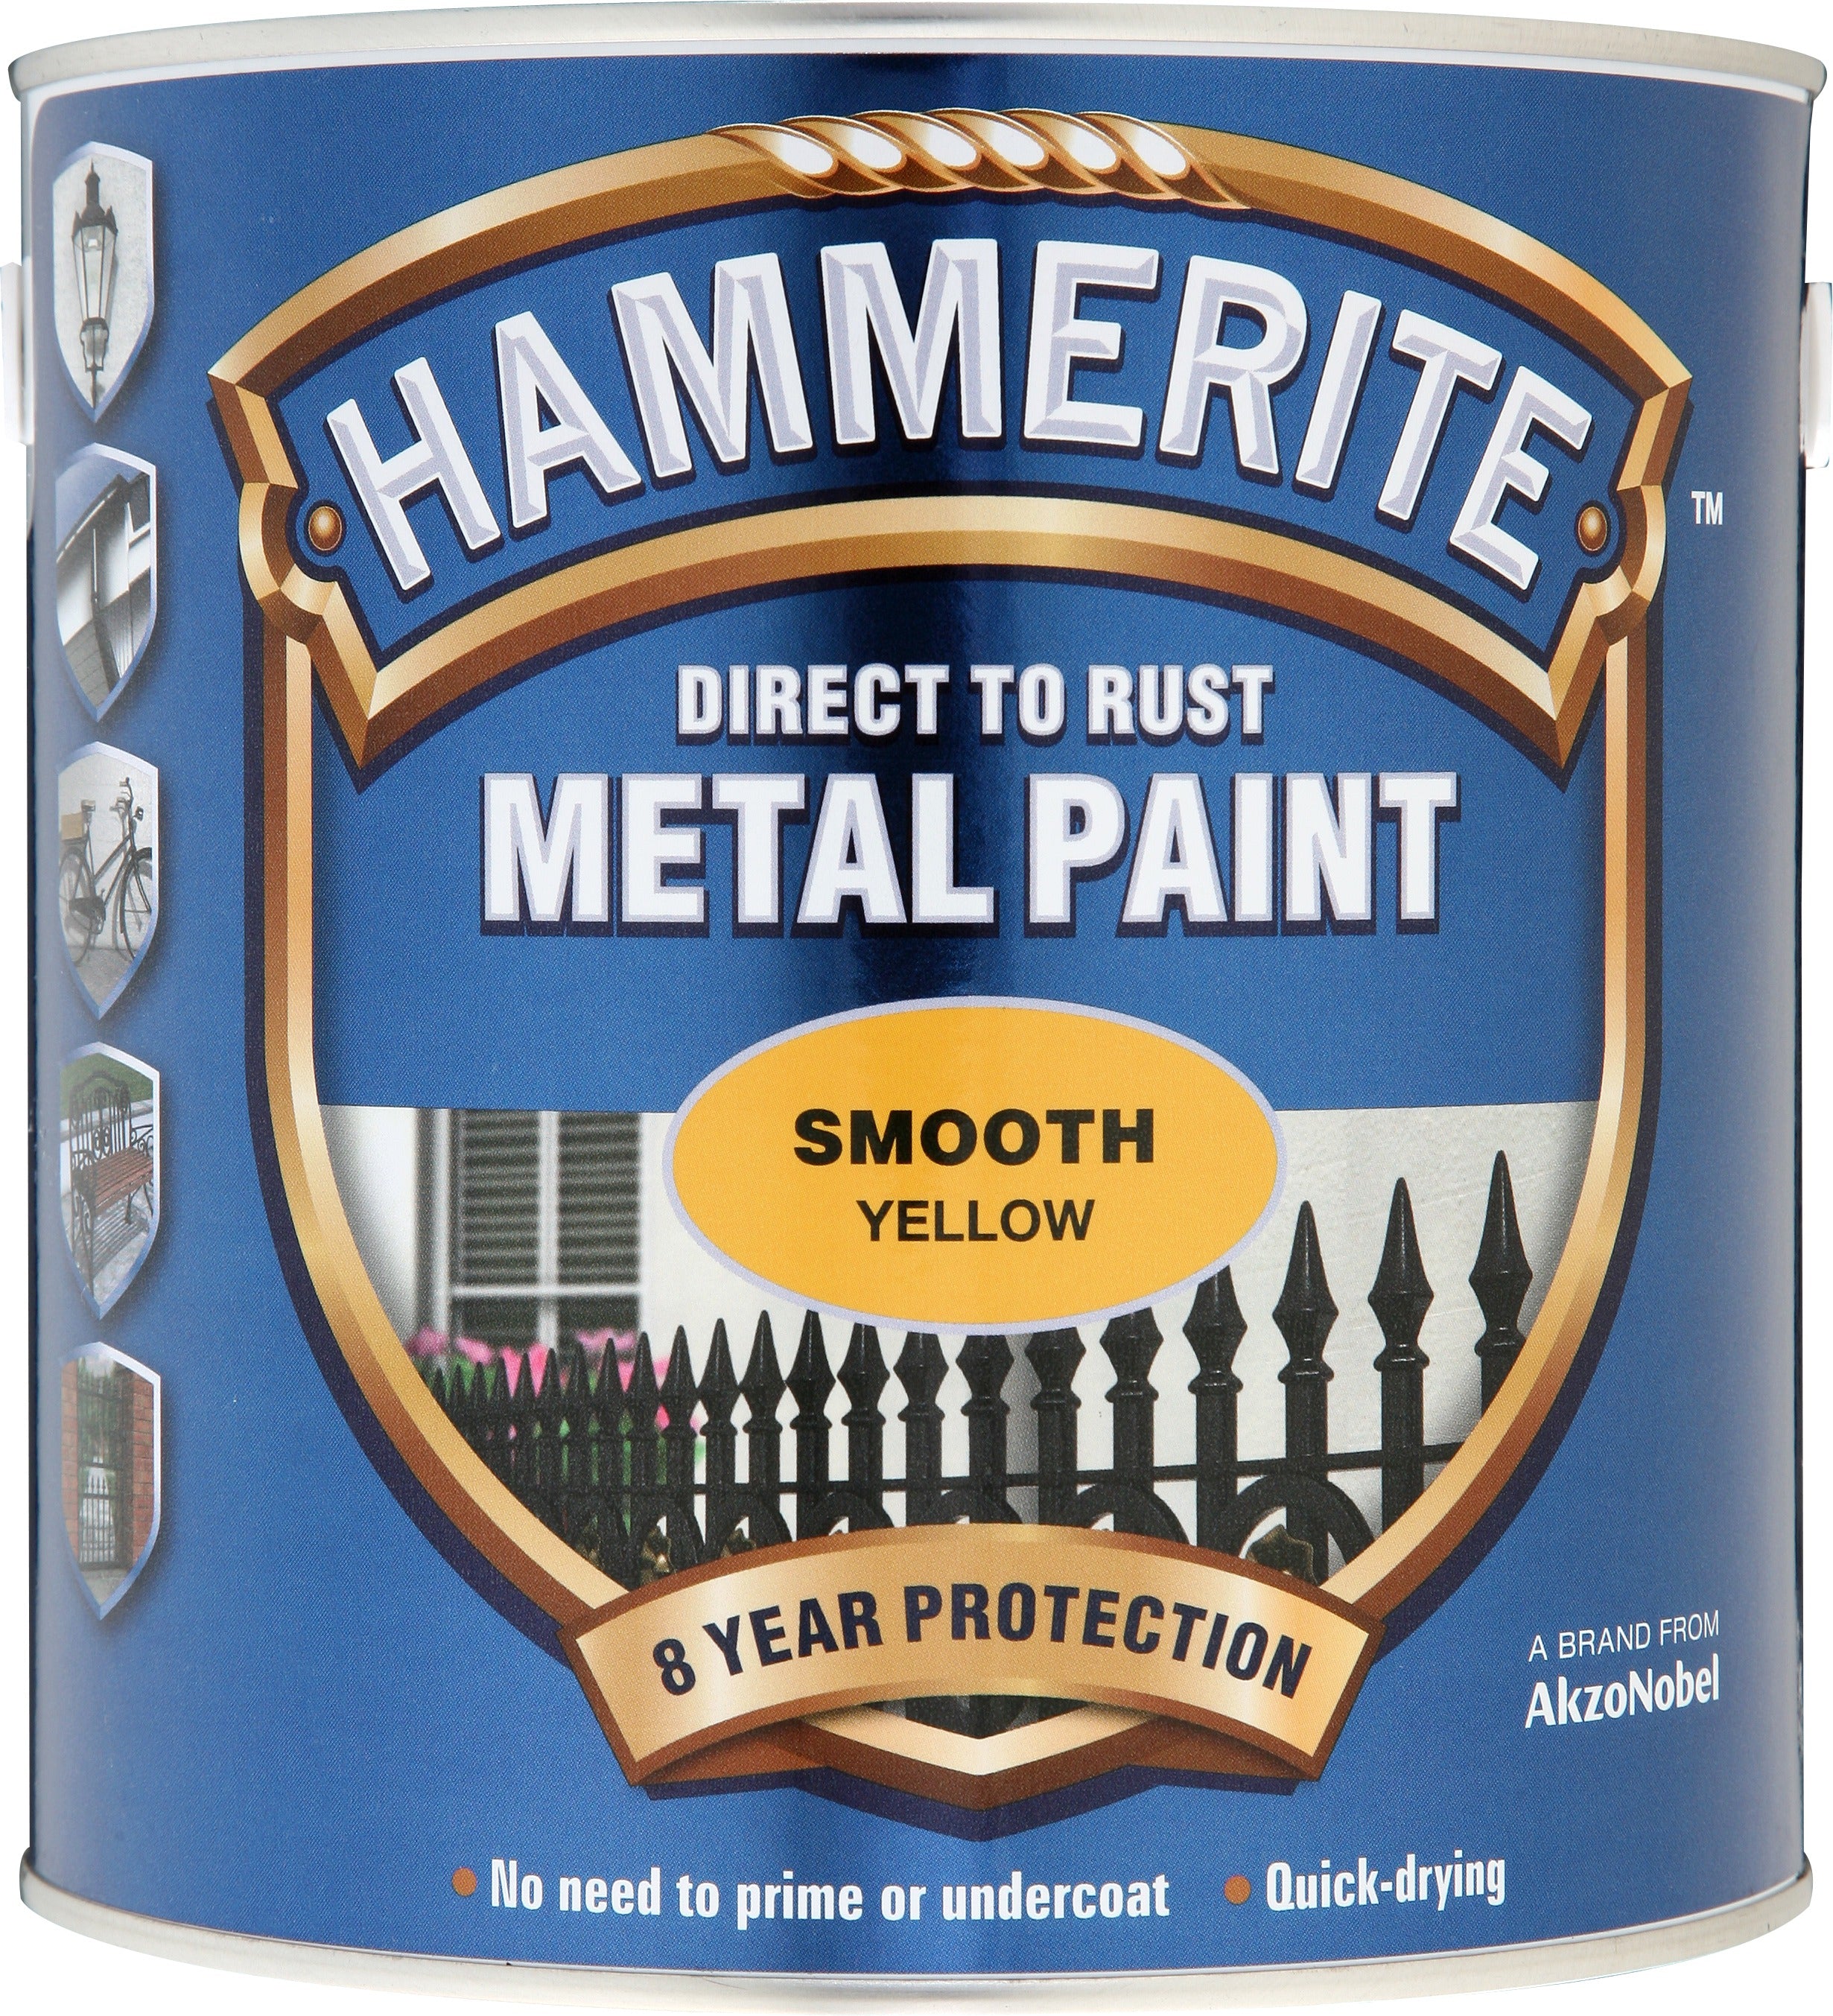 Hammerite Metal Paint Smooth Yellow 2.5L